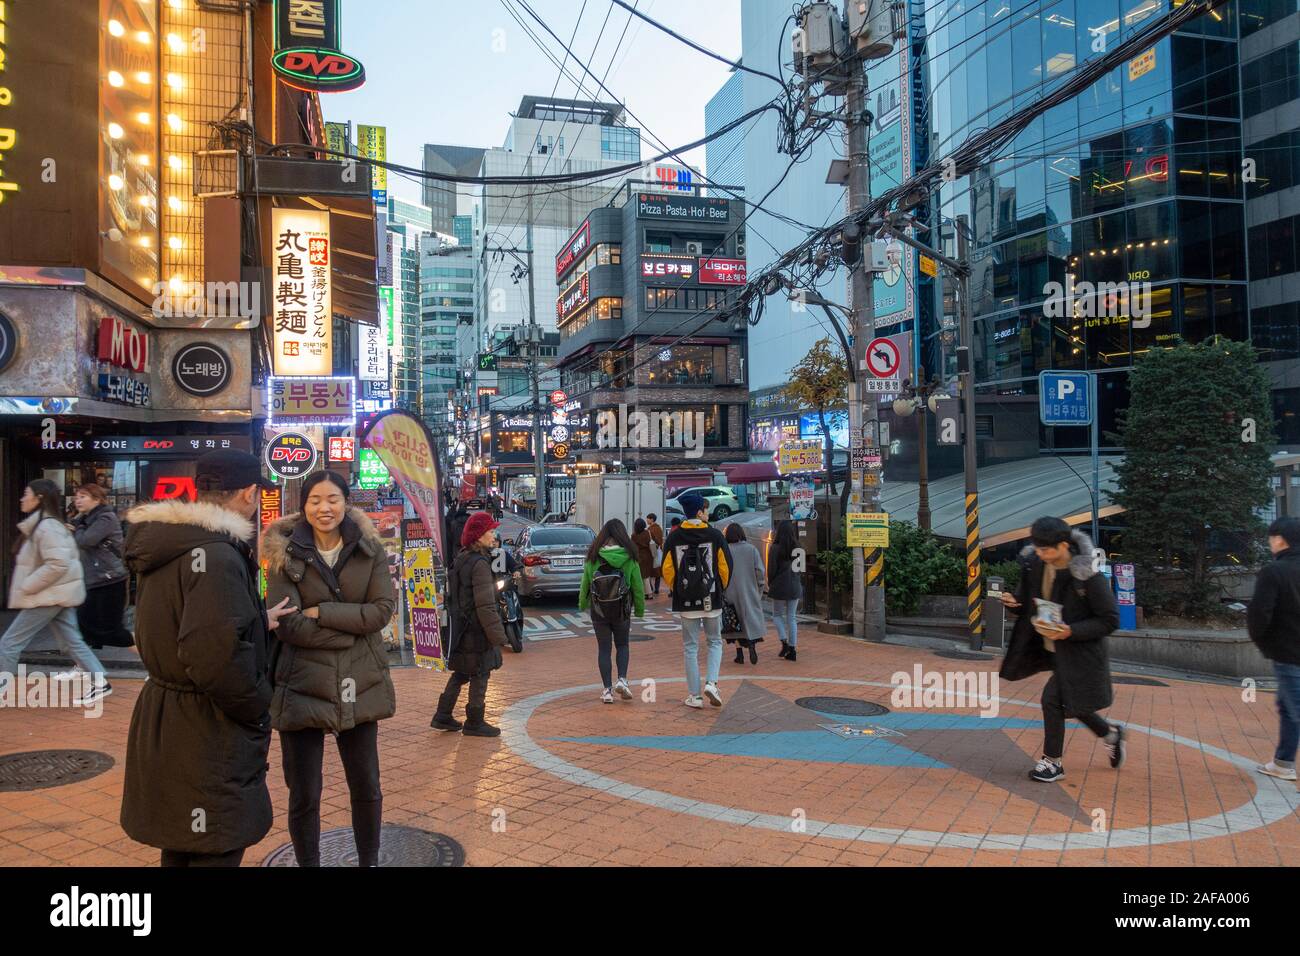 Seoul, South Korea, 2019: People sightseeing at evening in Gangnam district. Stock Photo